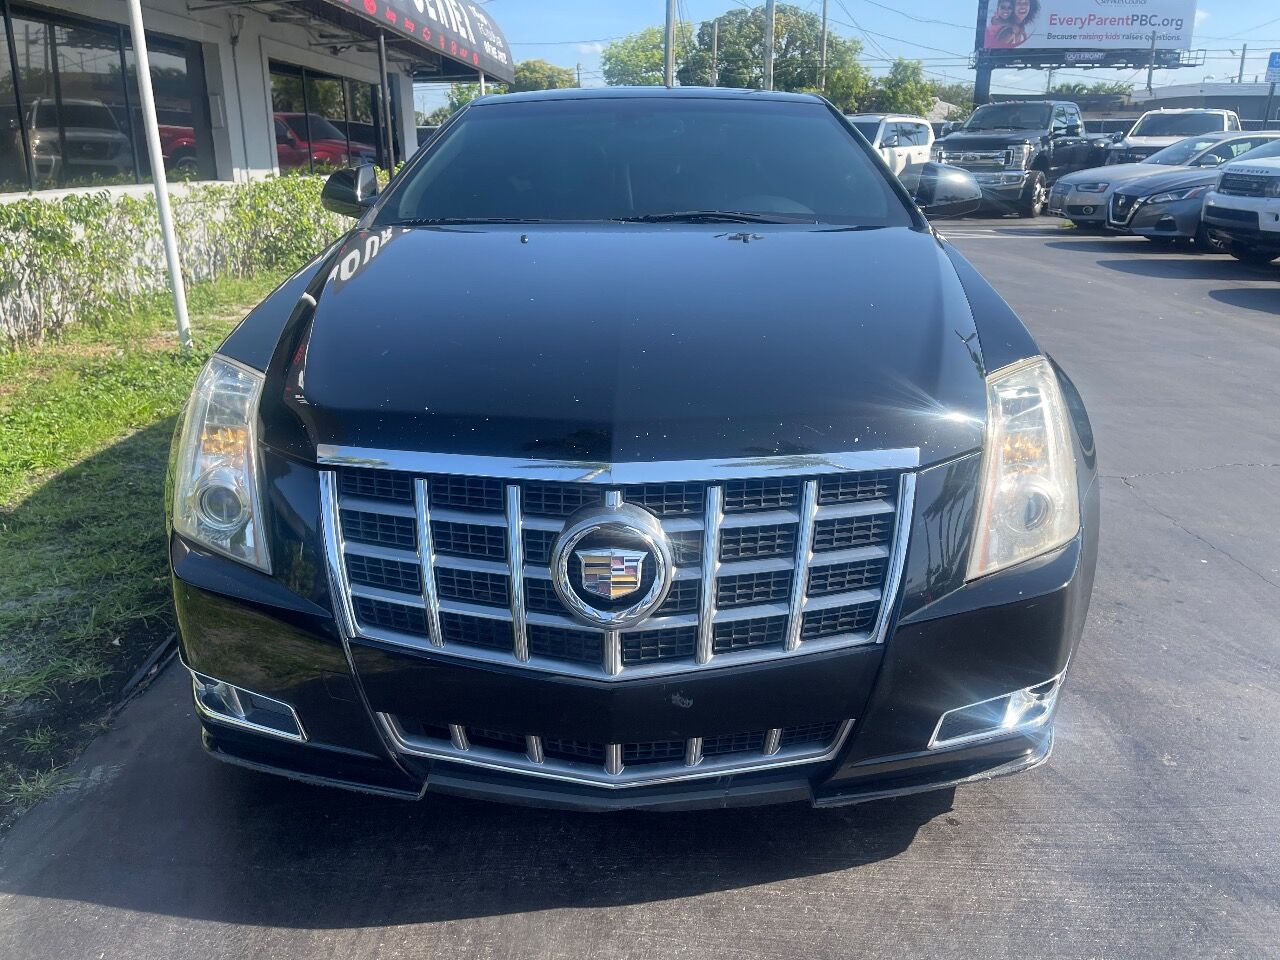 2012 CADILLAC CTS Coupe - $10,900